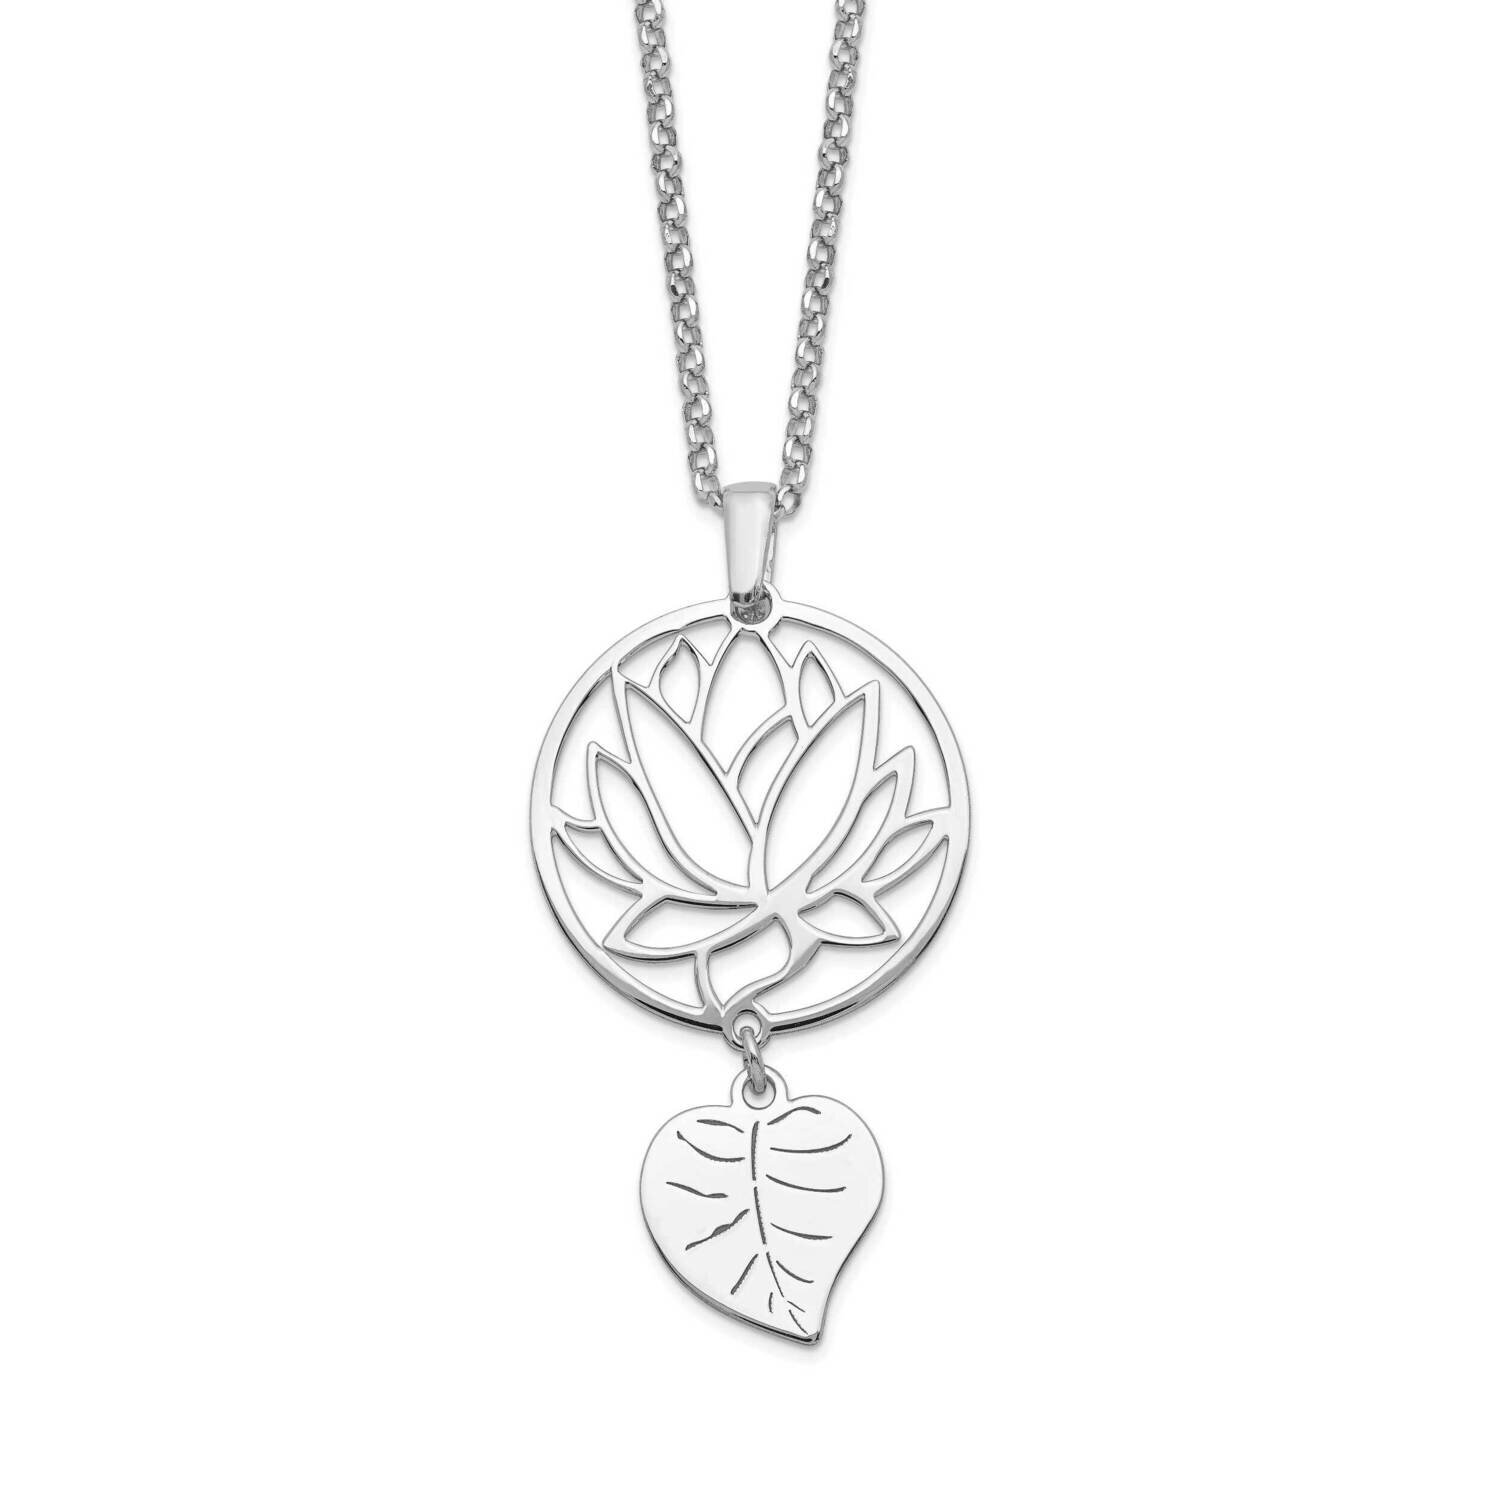 Flower & Leaf Dangle with 2 Inch Extension Necklace Sterling Silver Rhodium-Plated QG5225-15.5